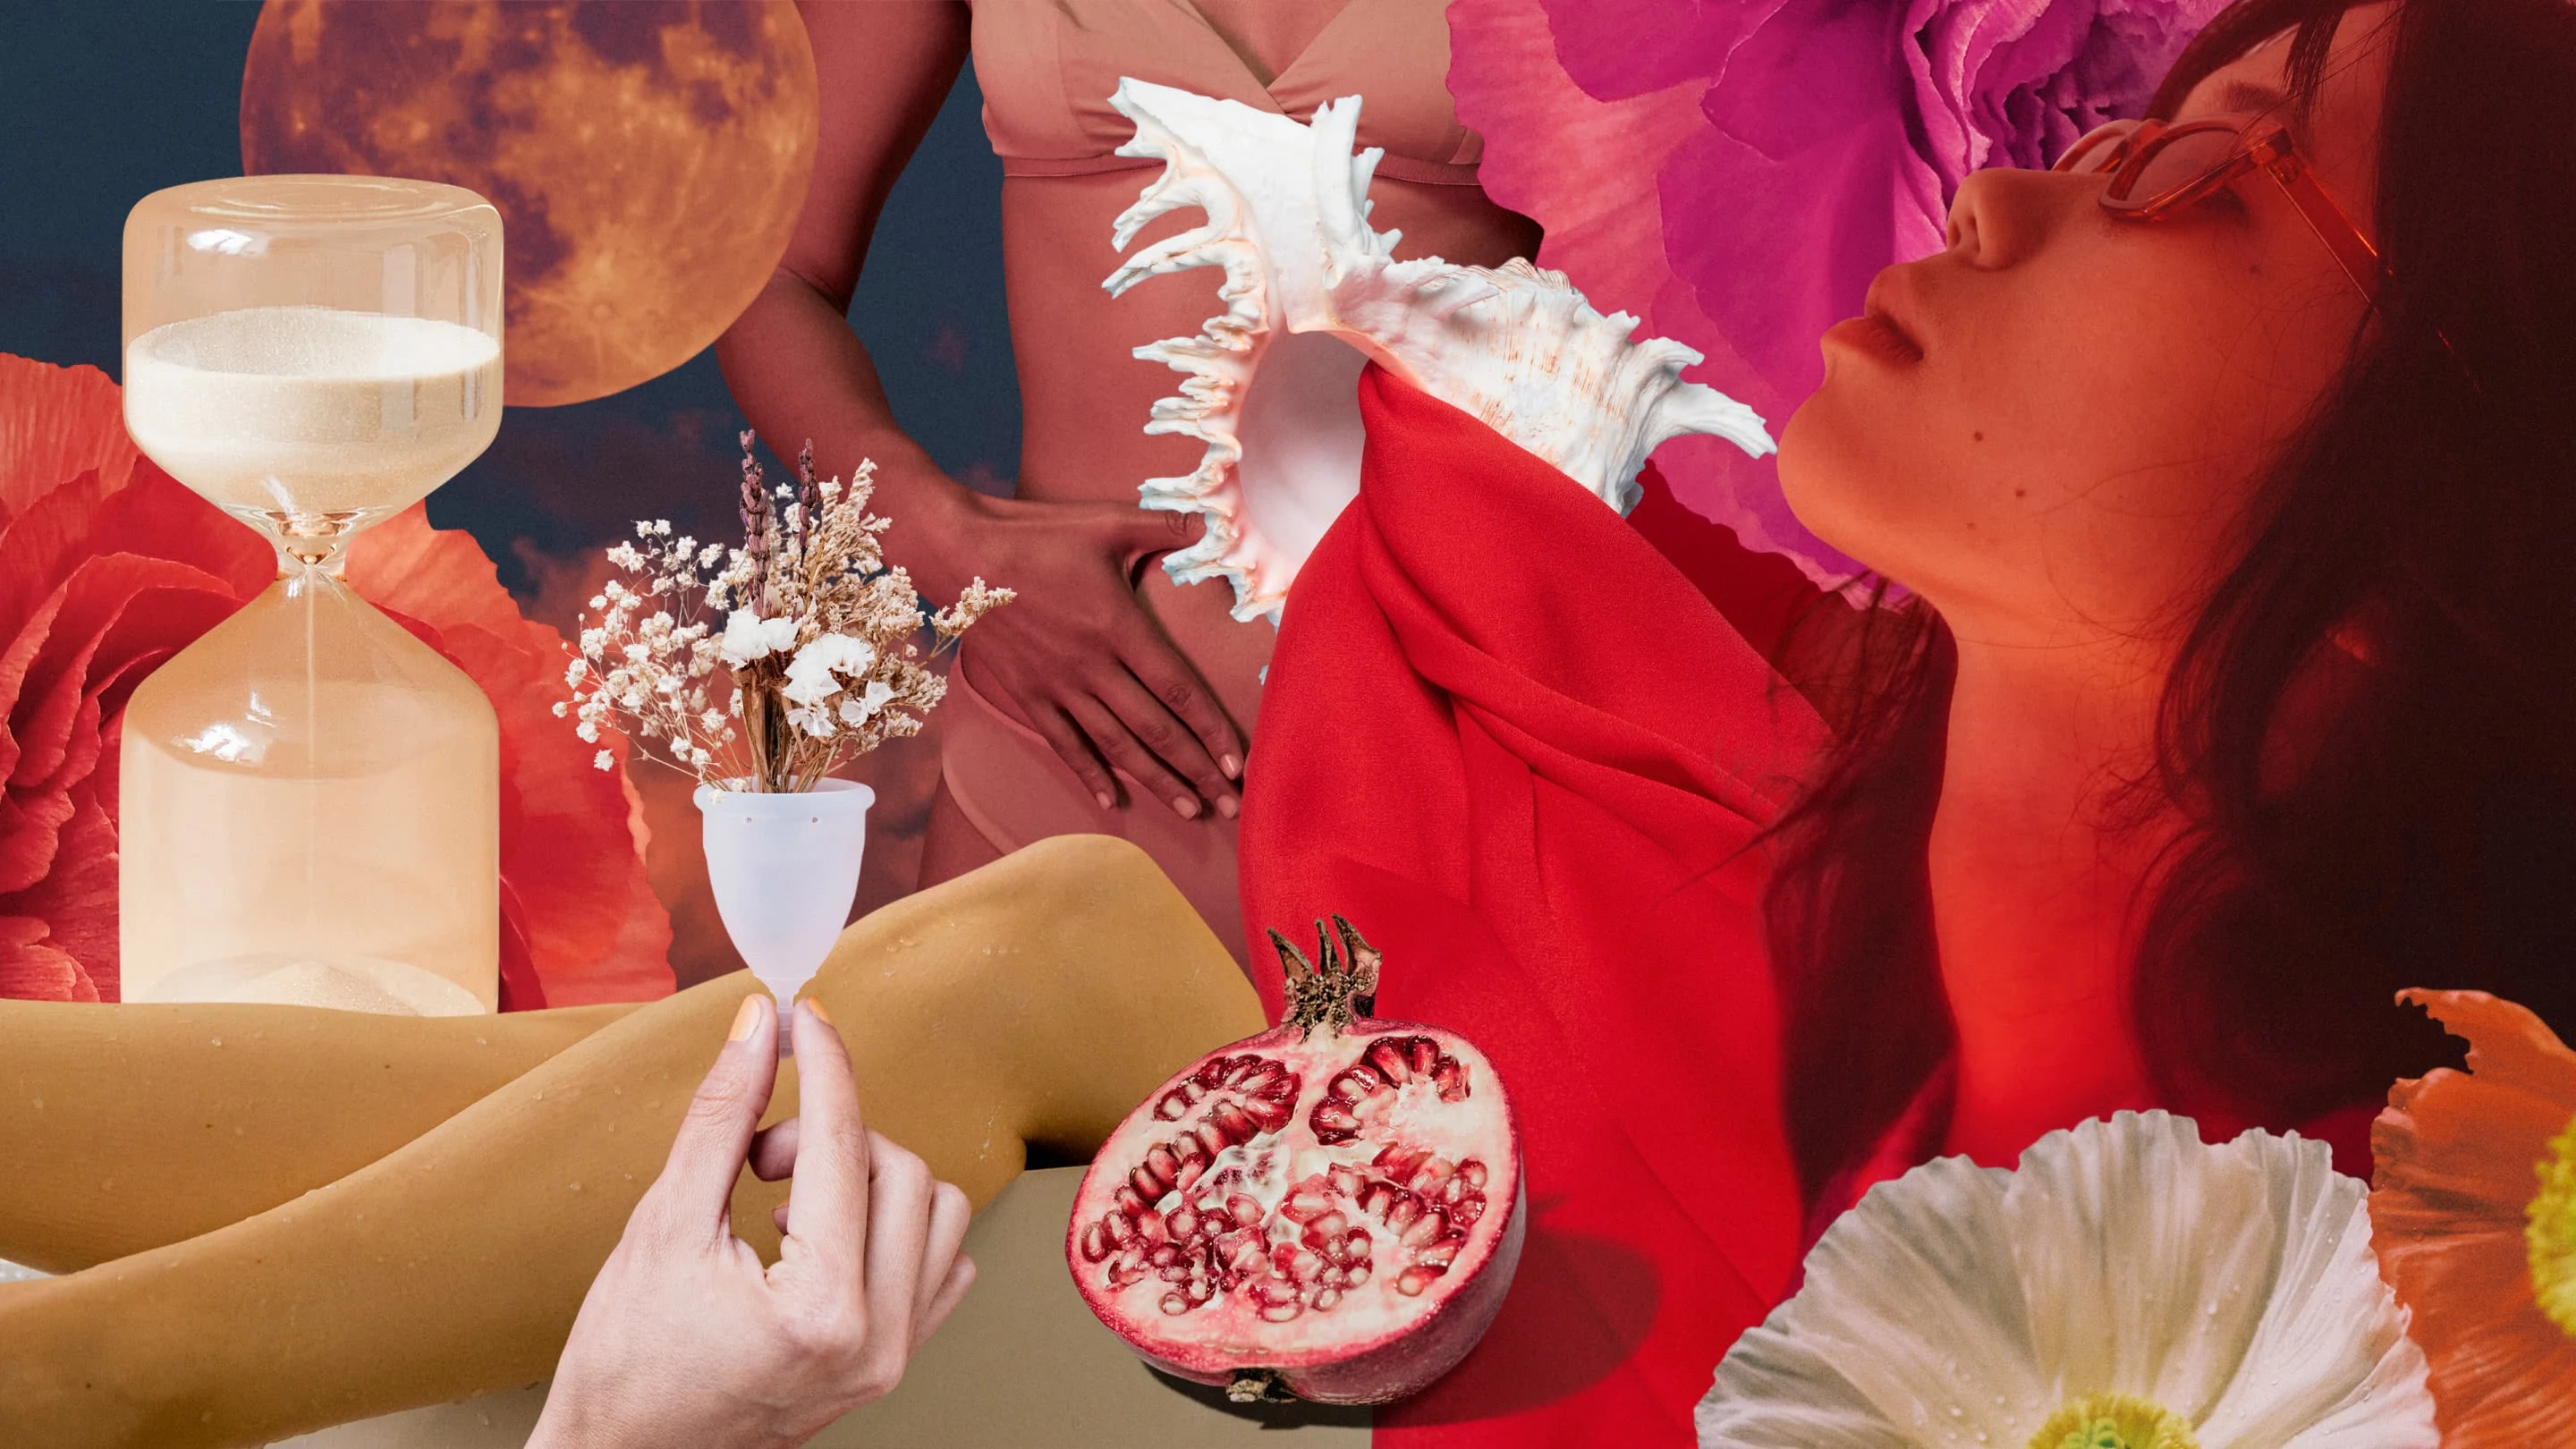 Colorful collage in shades of red. East-Asian woman in shades leans her head back on the right. Menstrual cup holds baby’s breath, open pomegranate on the bottom, glowing red moon on the upper left.